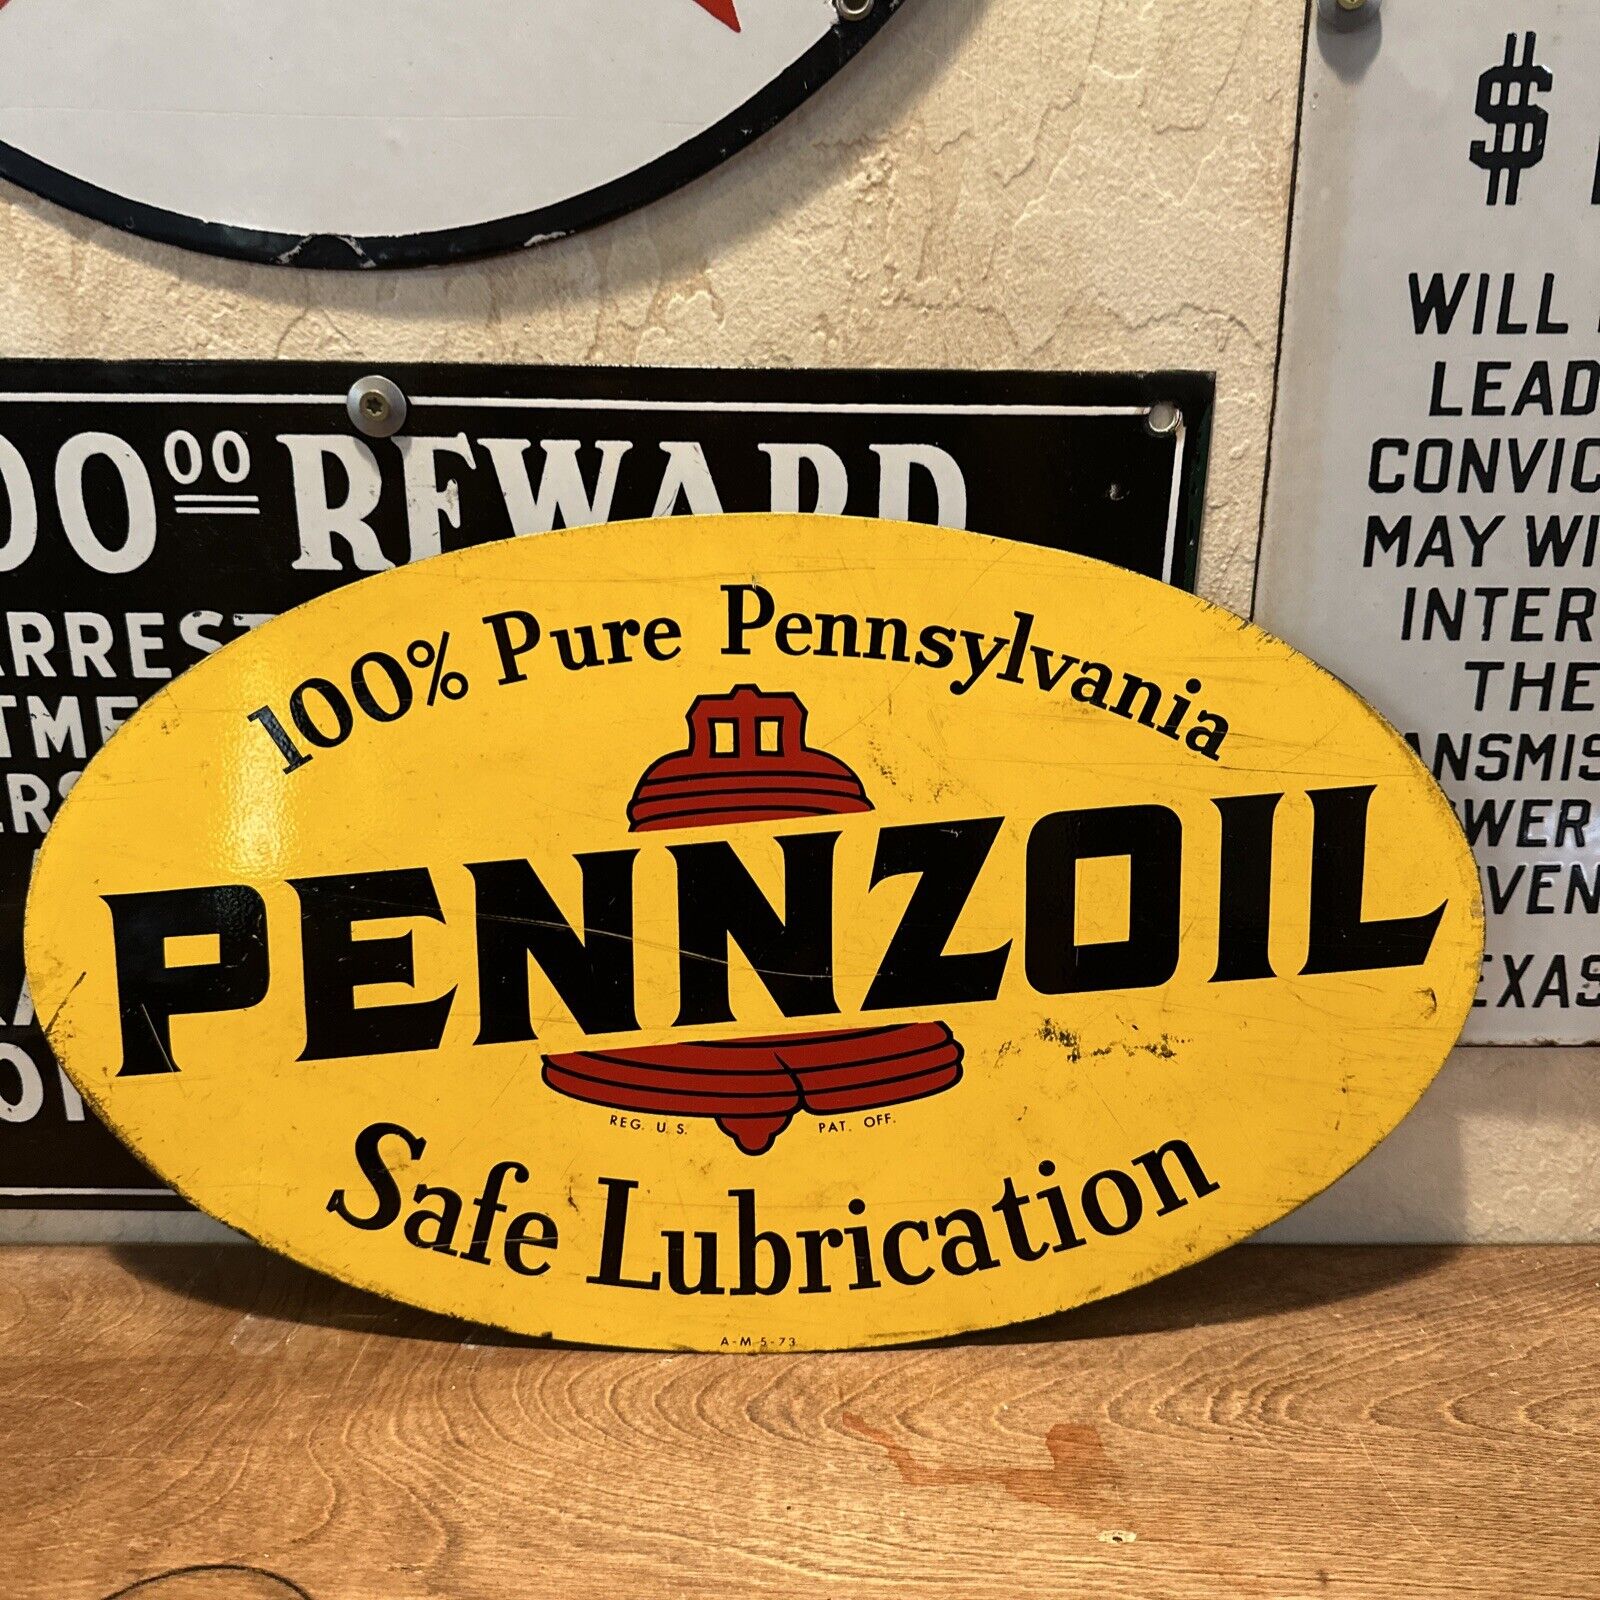 ORIGINAL & AUTHENTIC 2-SIDED \'\'PENNZOIL\'\' PAINTED METAL SIGN 16.5X10 INCH